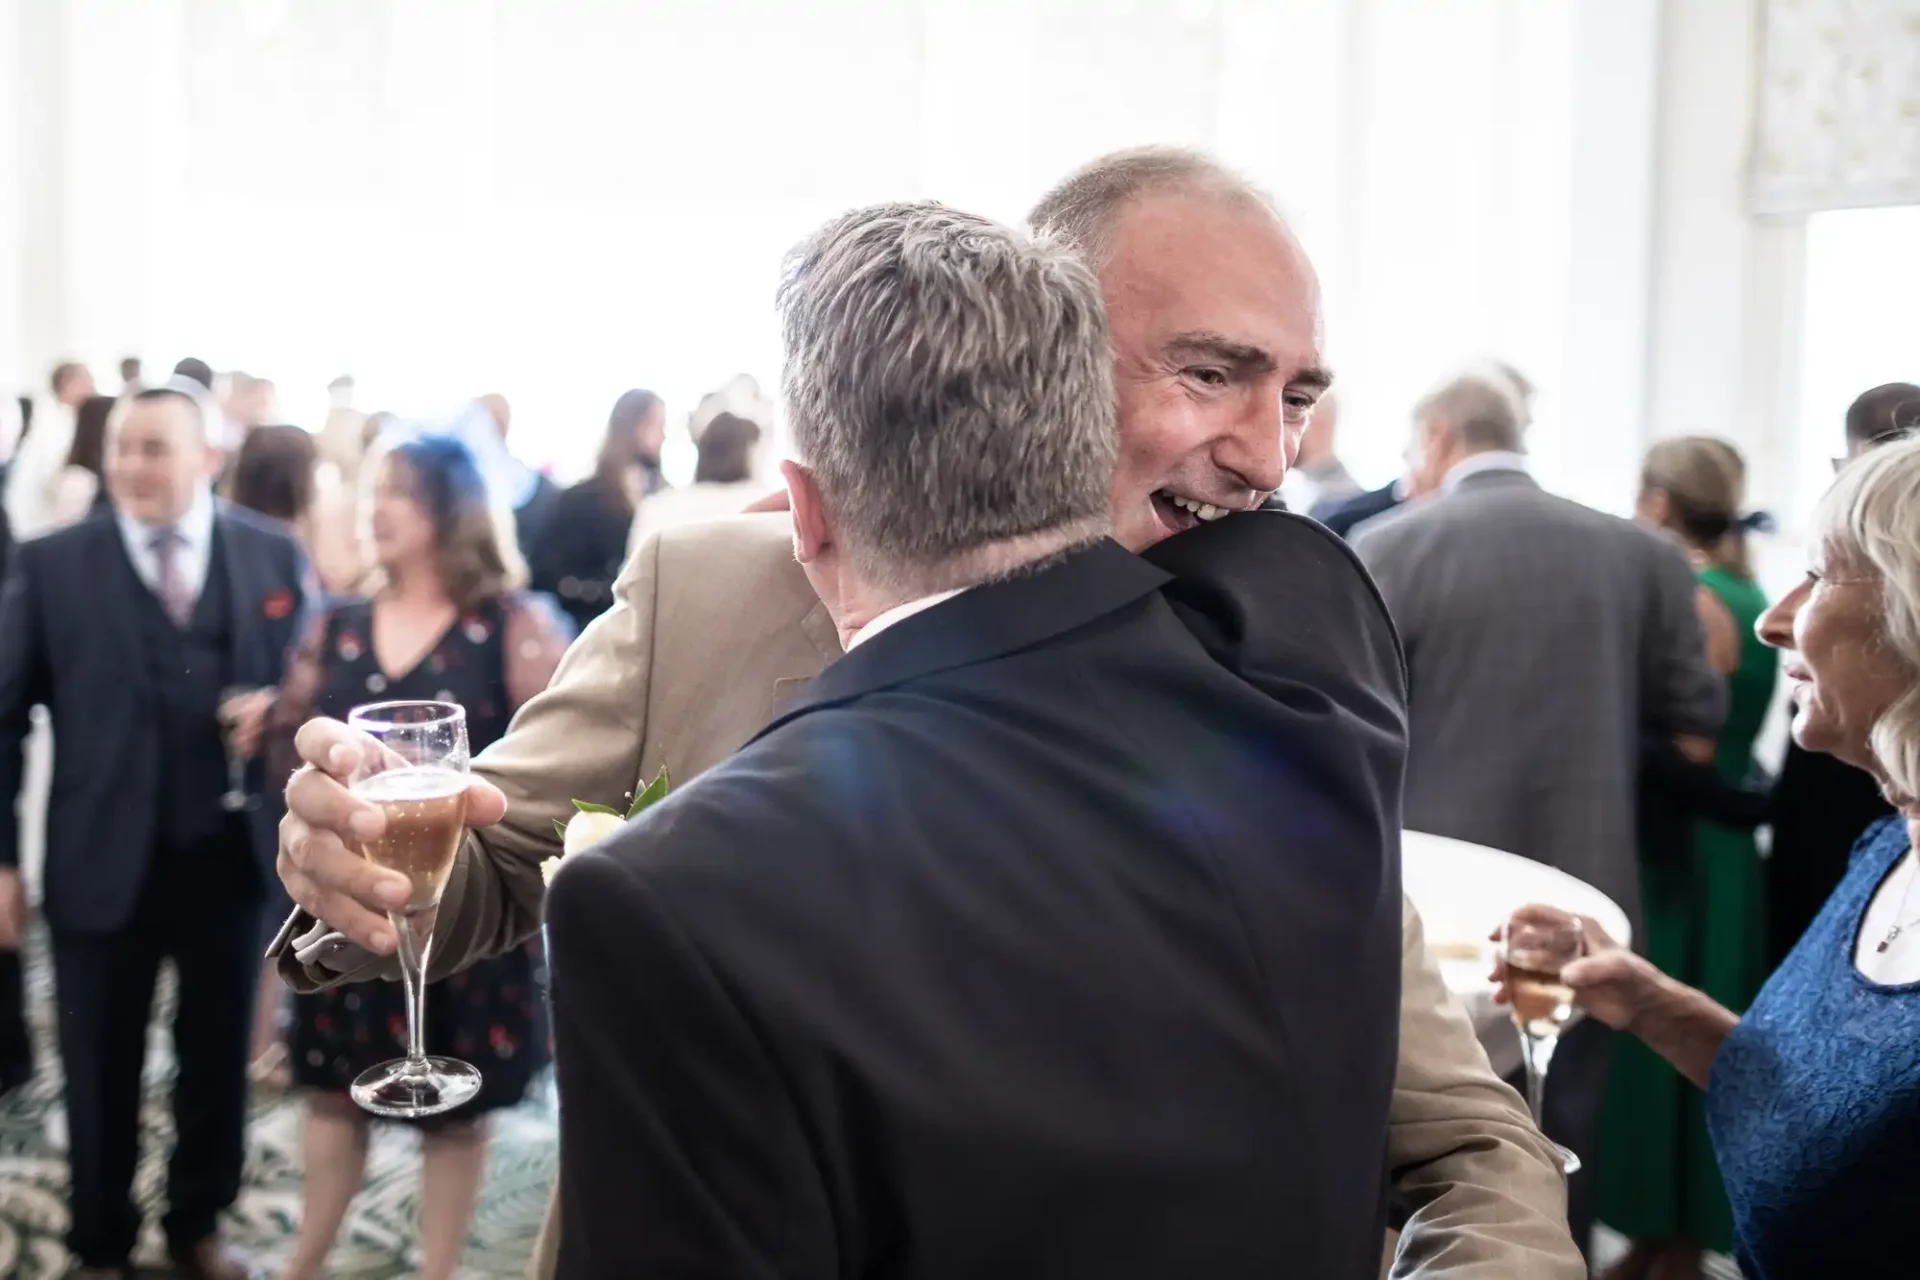 Two men embracing at a social event, one holding a glass of champagne, with other guests mingling in the background.